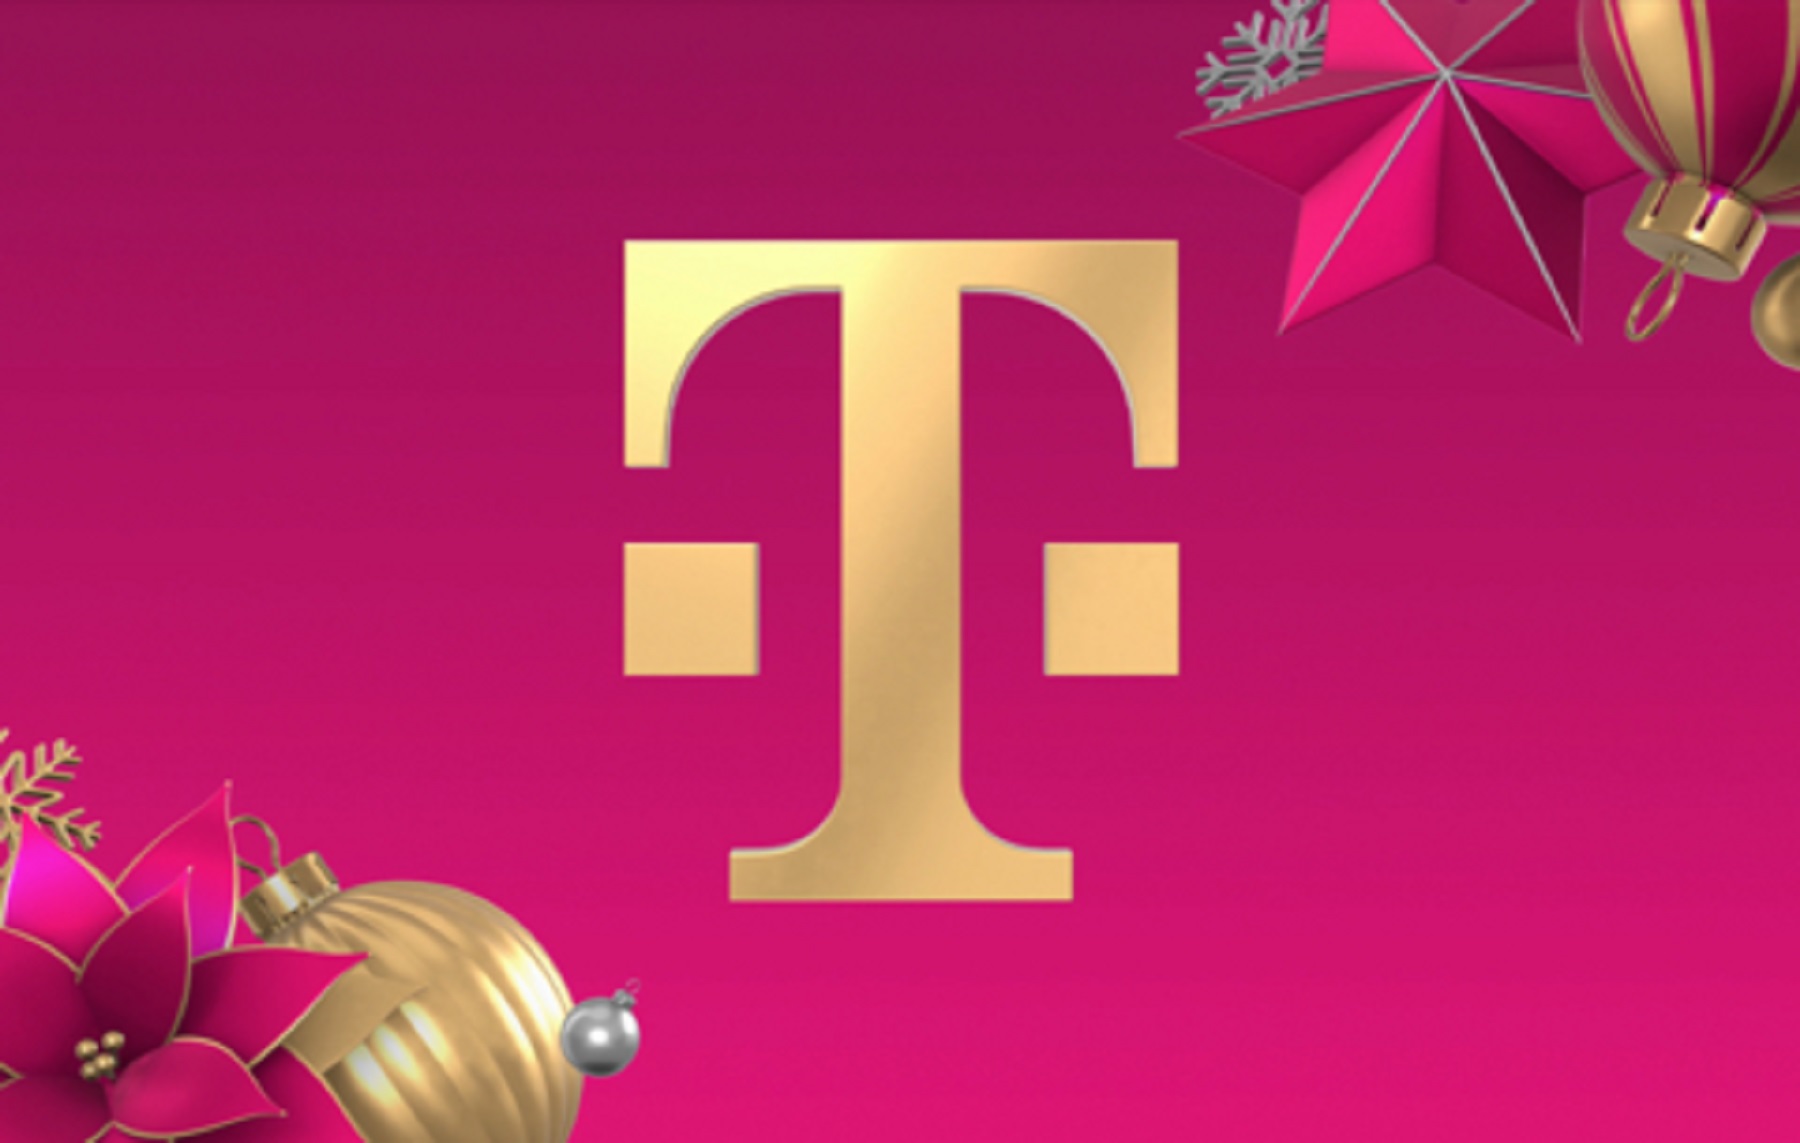 T-Mobile is Unwrapping Black Friday Deals Early. Score the Latest Tech Free!